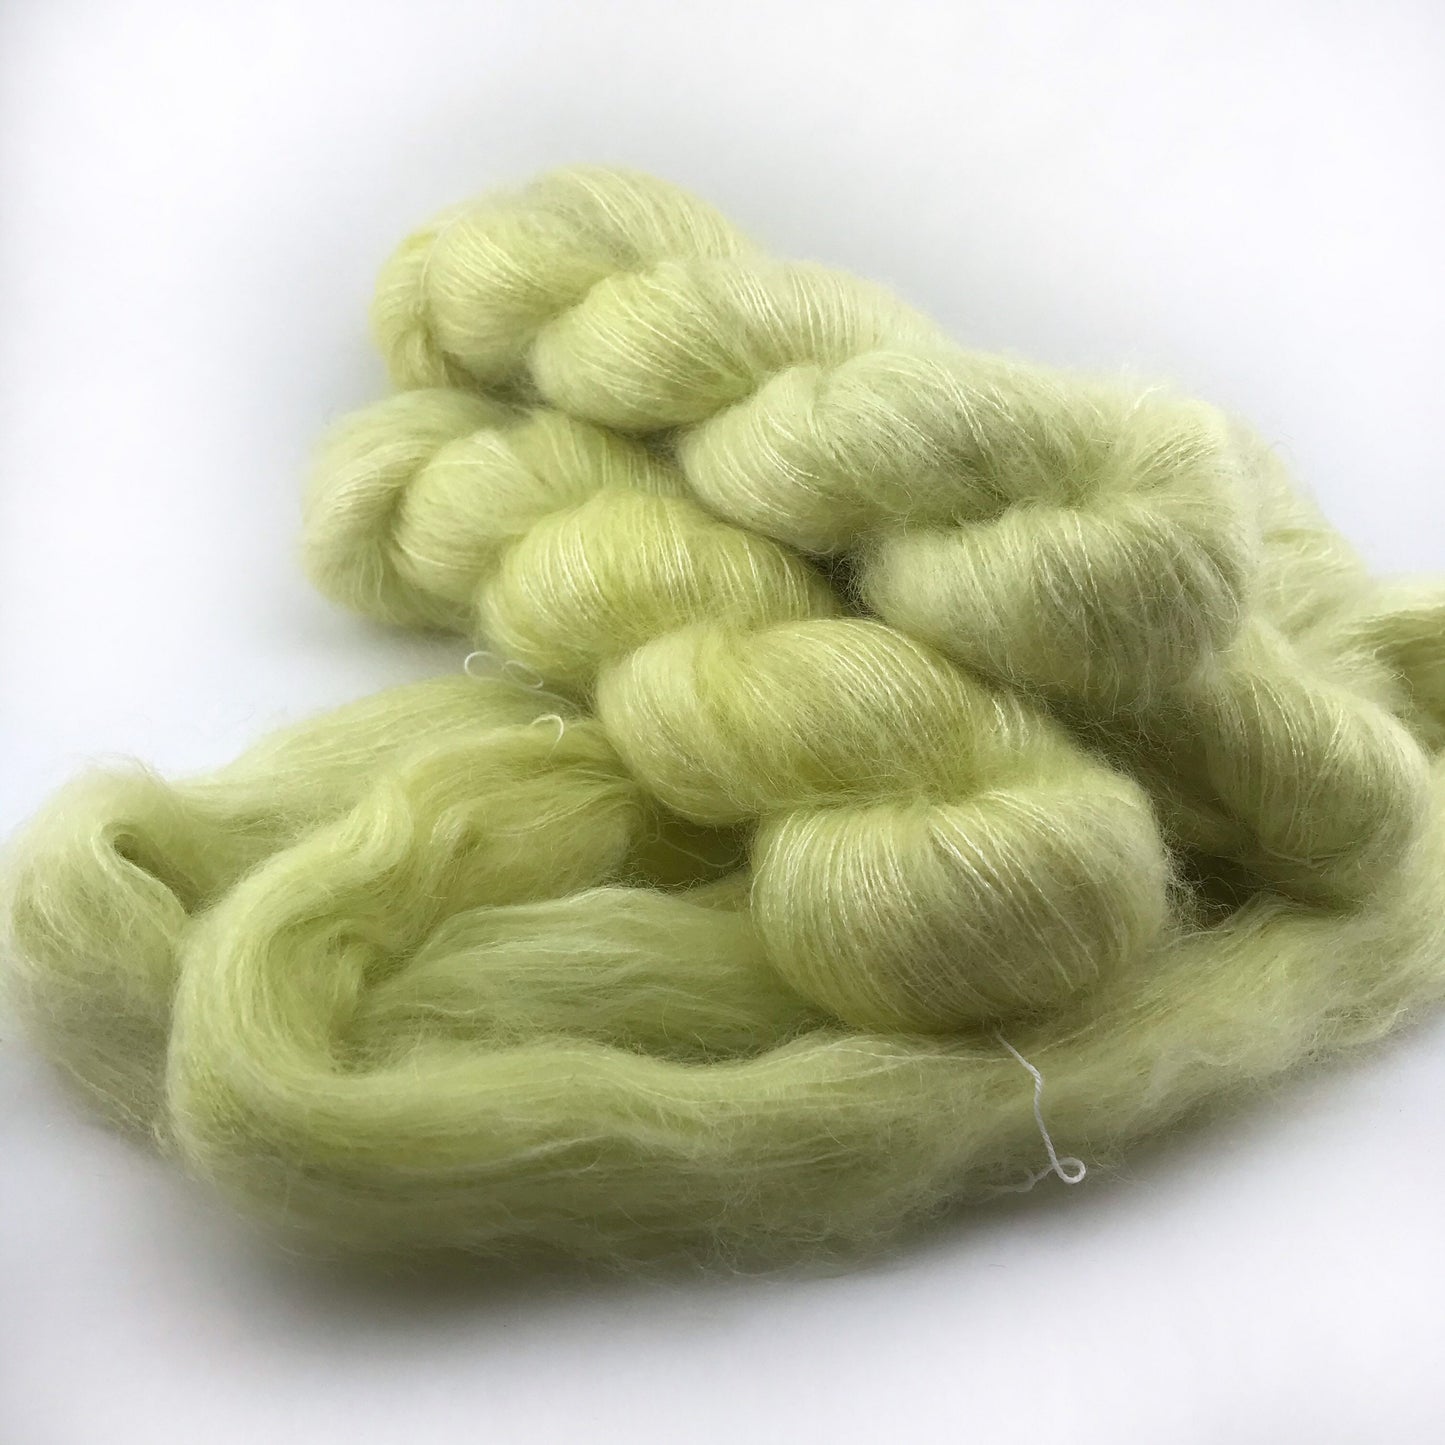 GLOWBUG - Yellow Green Neon Lace Weight Mohair